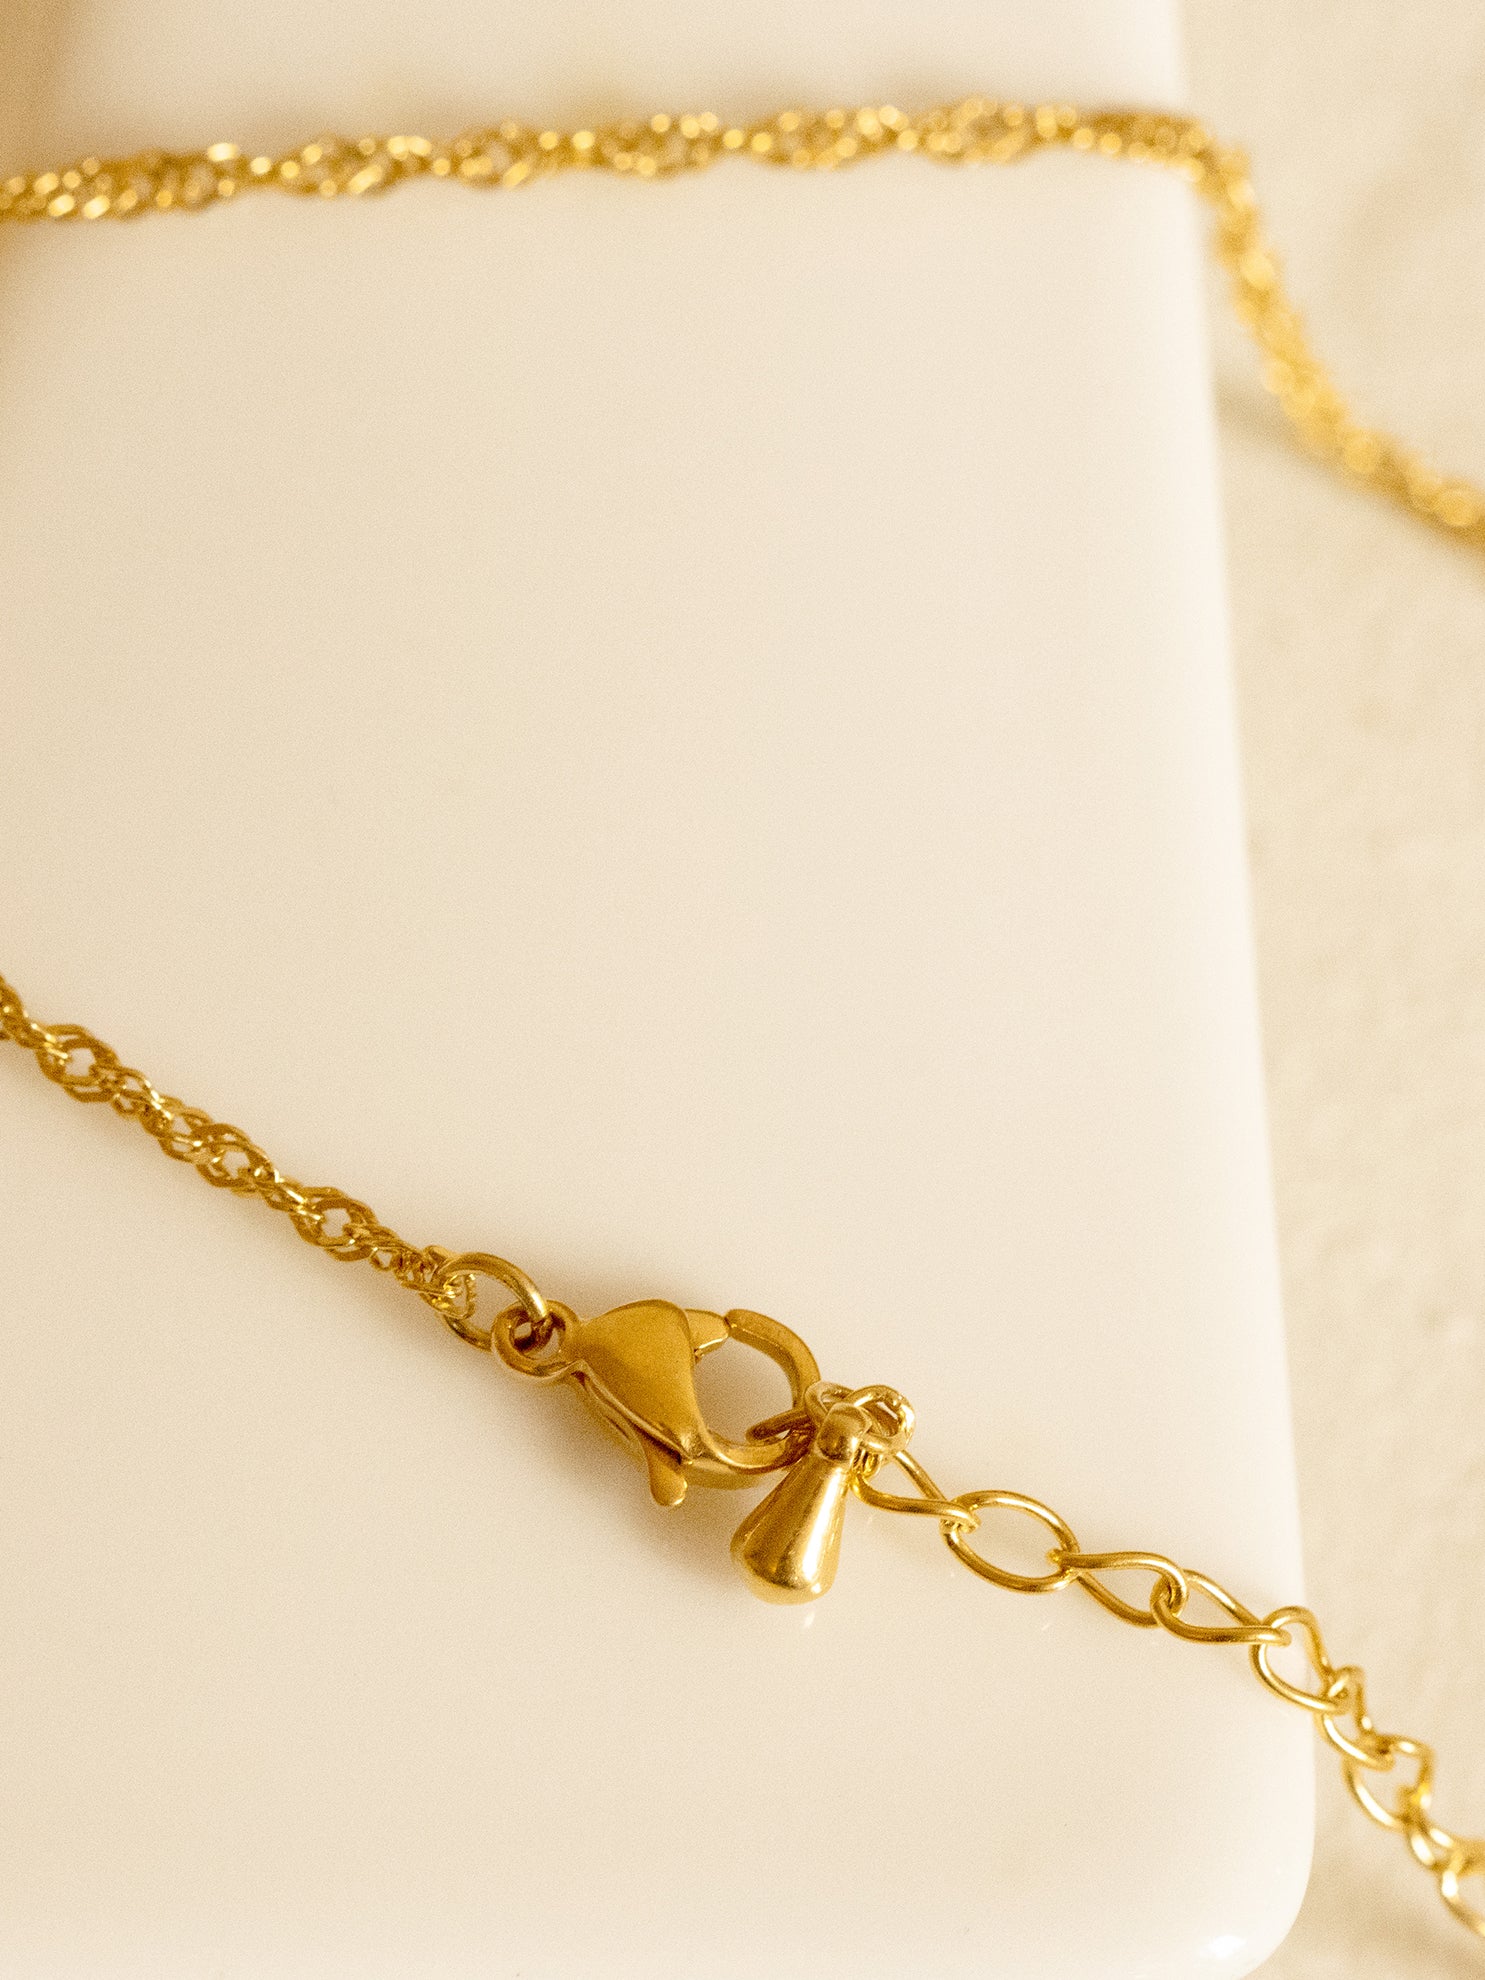 Gold Initial Coin Necklace With Singapore Chain